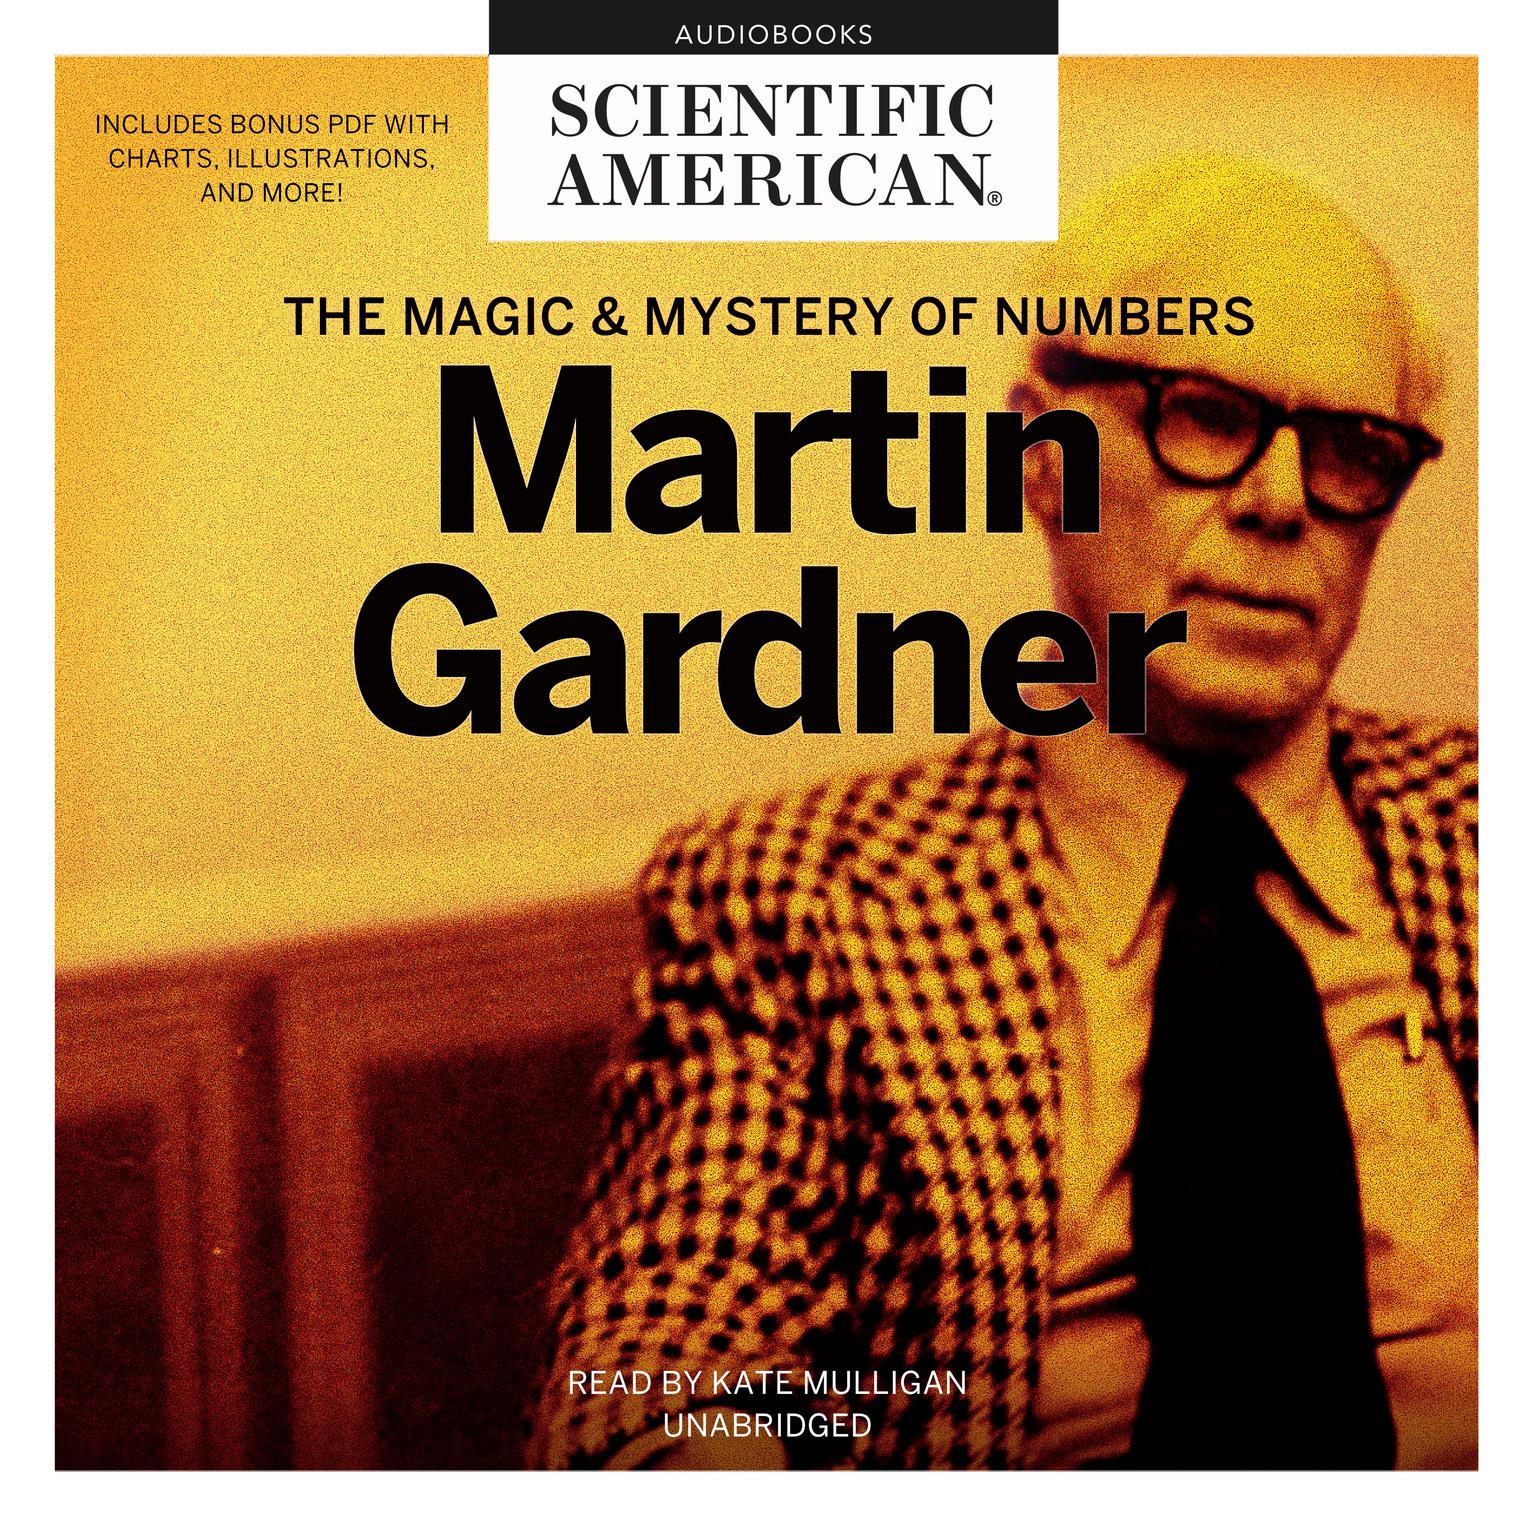 Martin Gardner: The Magic and Mystery of Numbers Audiobook, by Scientific American